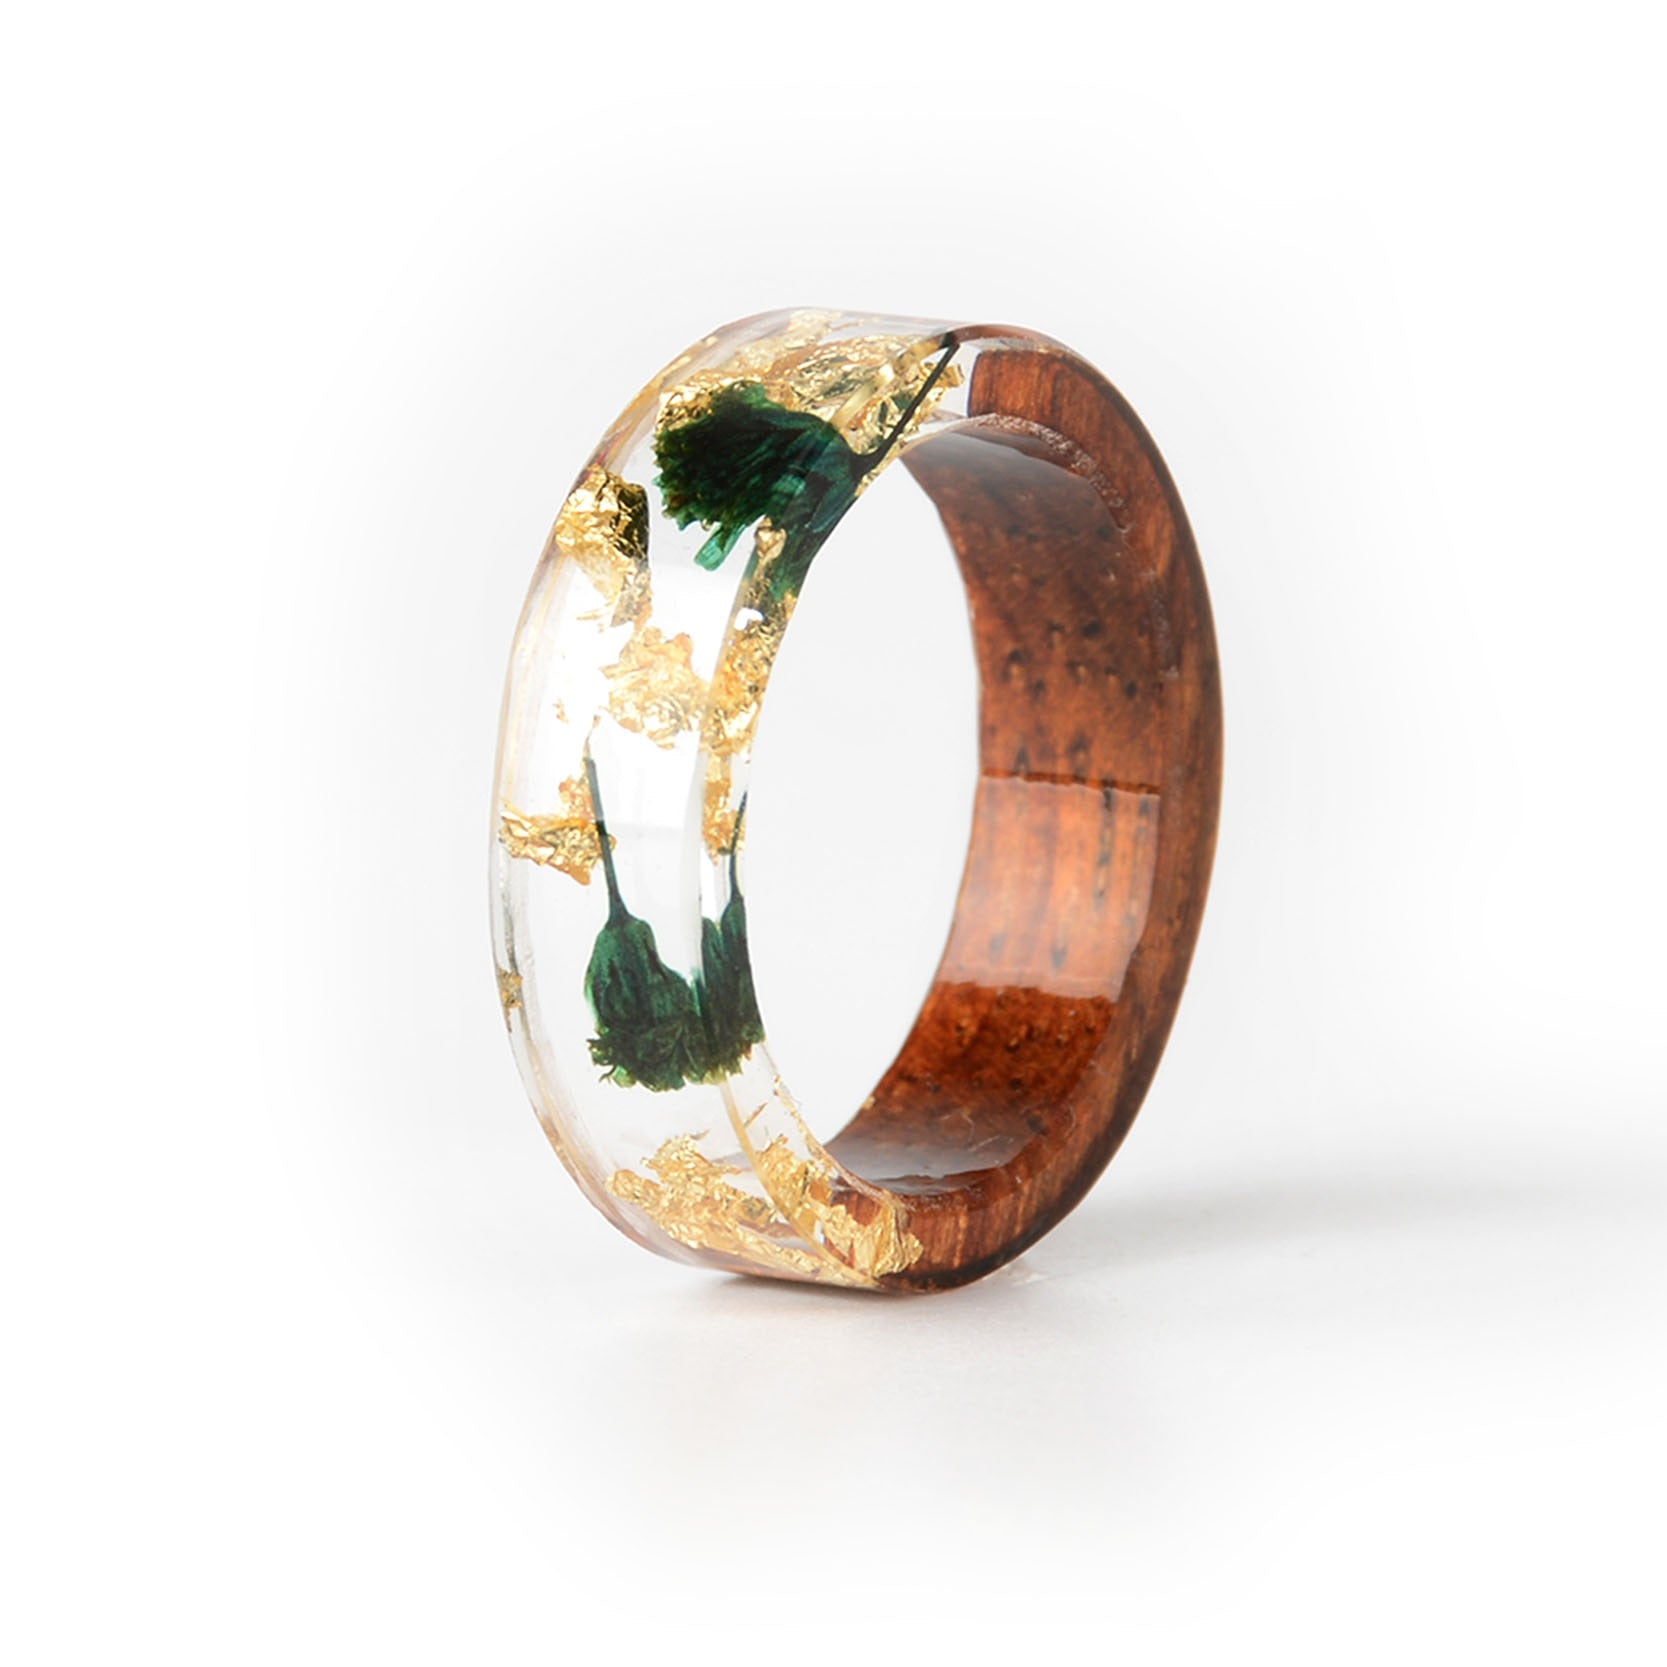 Buy Red Resin Ring, Wooden Wedding Ring, Wood Jewelry, Wooden Ring, Wooden  Rings for Women, Wood Resin Jewelry,natural Wood Ring,women Wood Ring  Online in India - Etsy